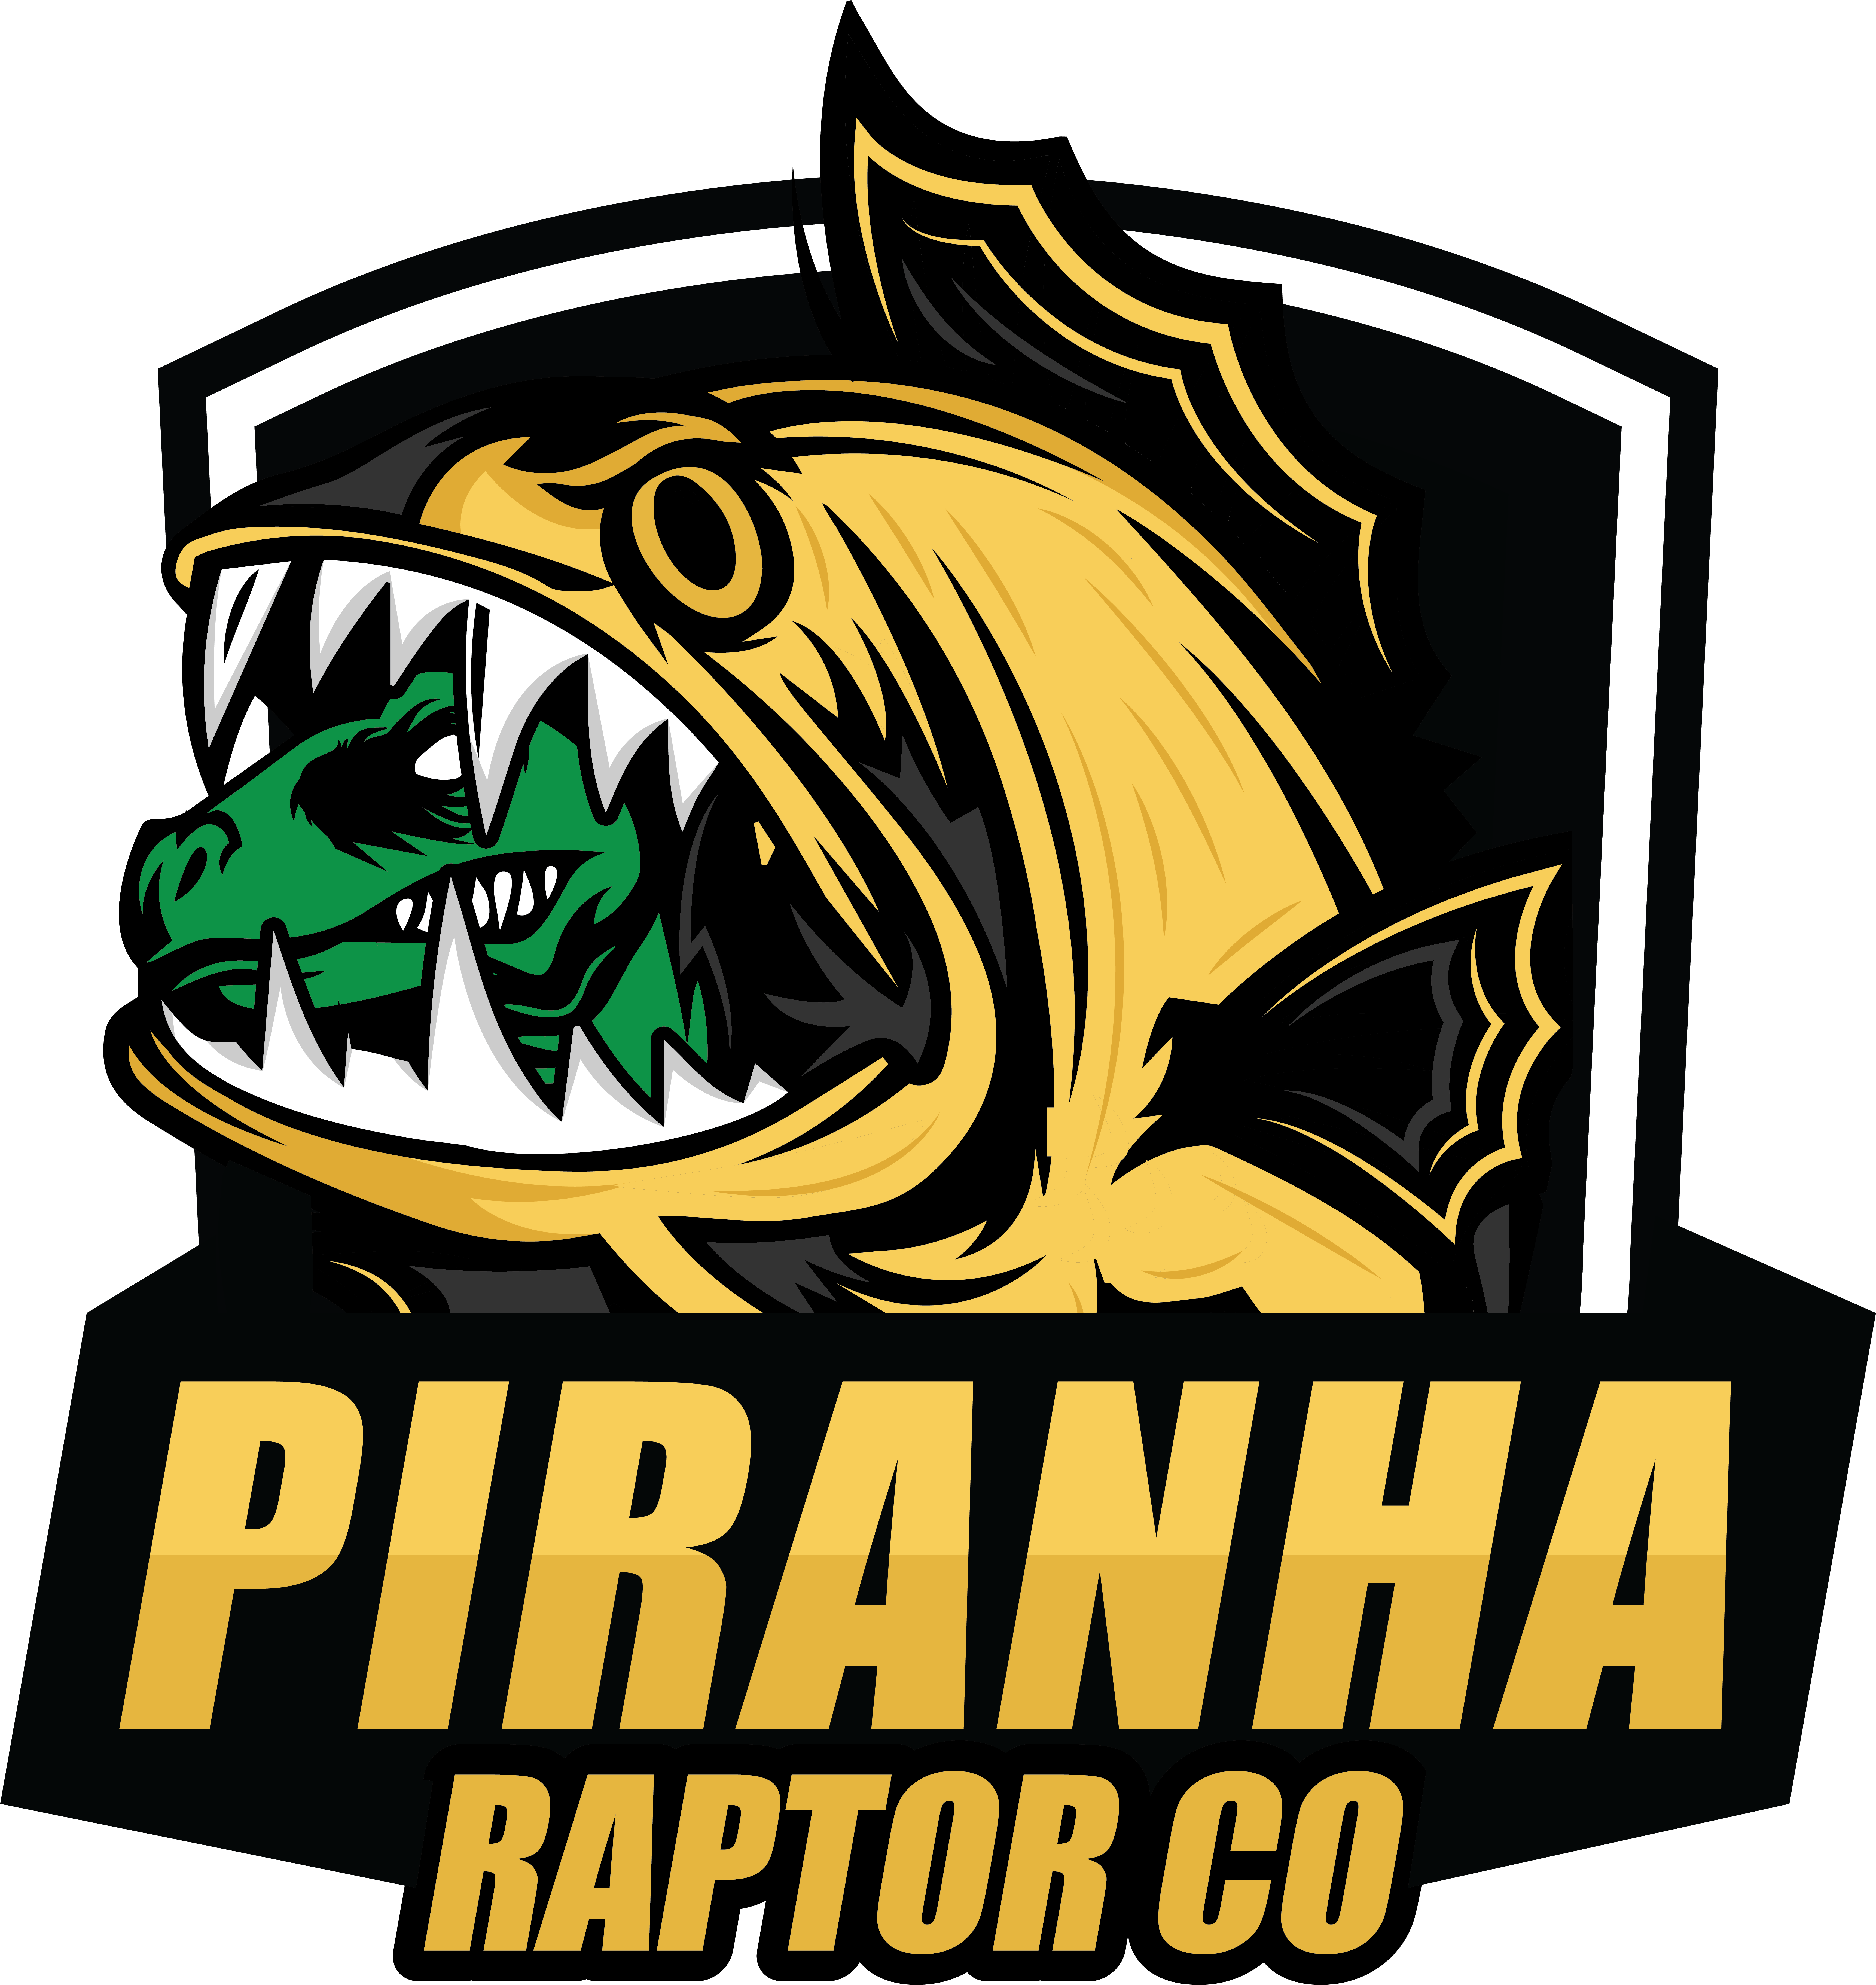 Piranha Raptor Co. - High Quality Fishing Lures, Gear, and Apparel